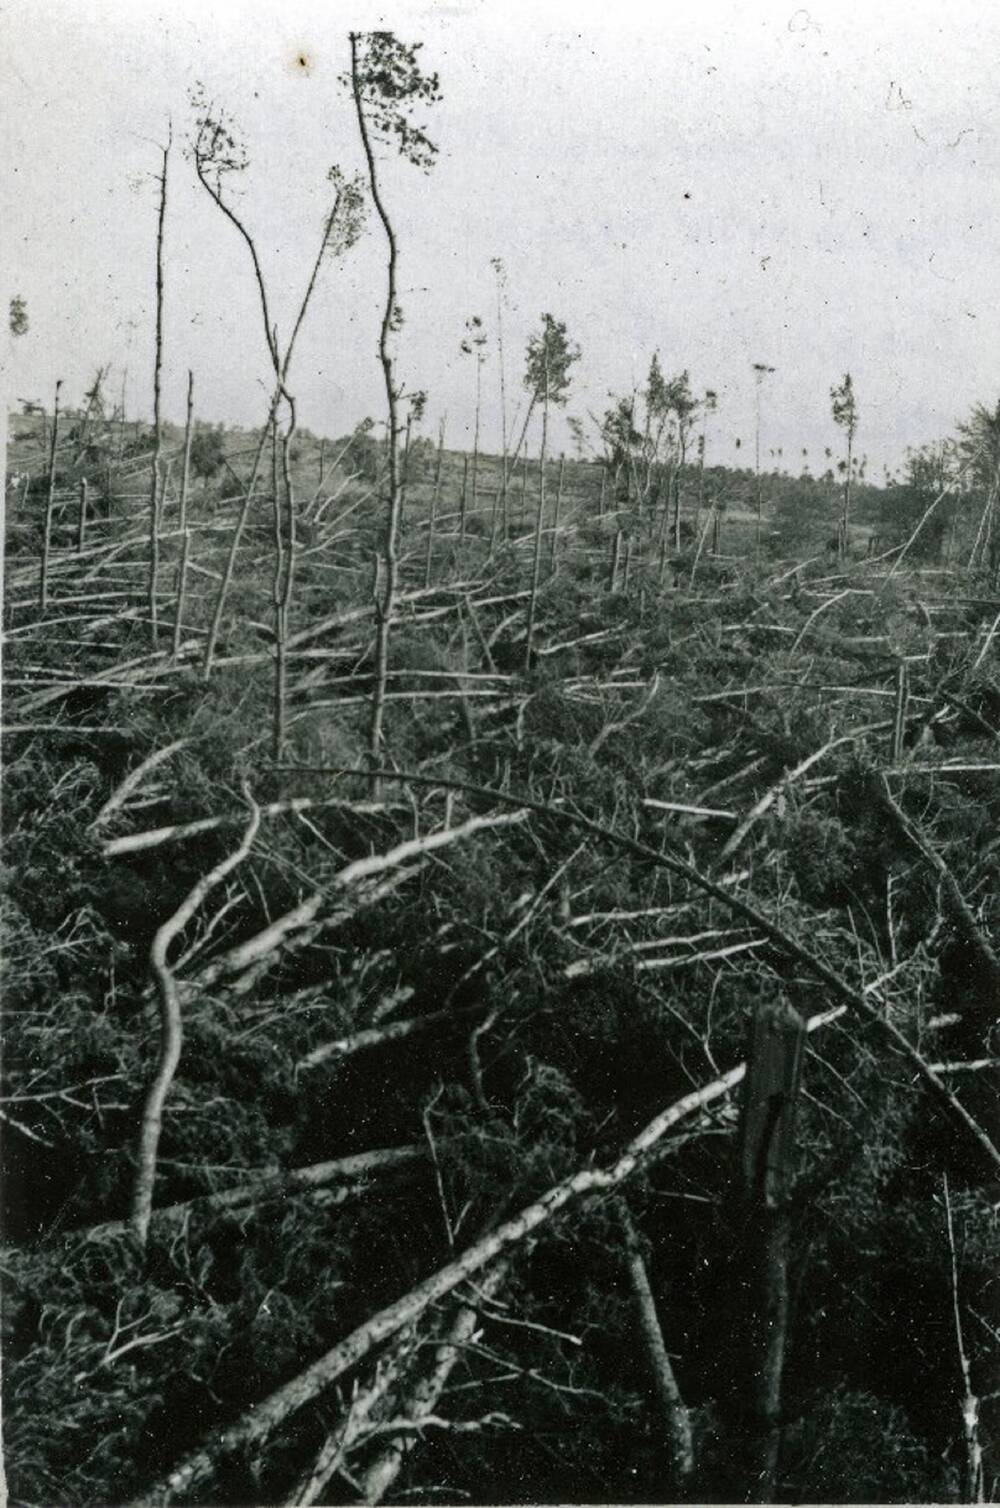 A black and white photograph showing the devastation to a woodland after a hurricane. Almost every tree has fallen over a huge area; just a handful remain standing and they have lost most of their branches.